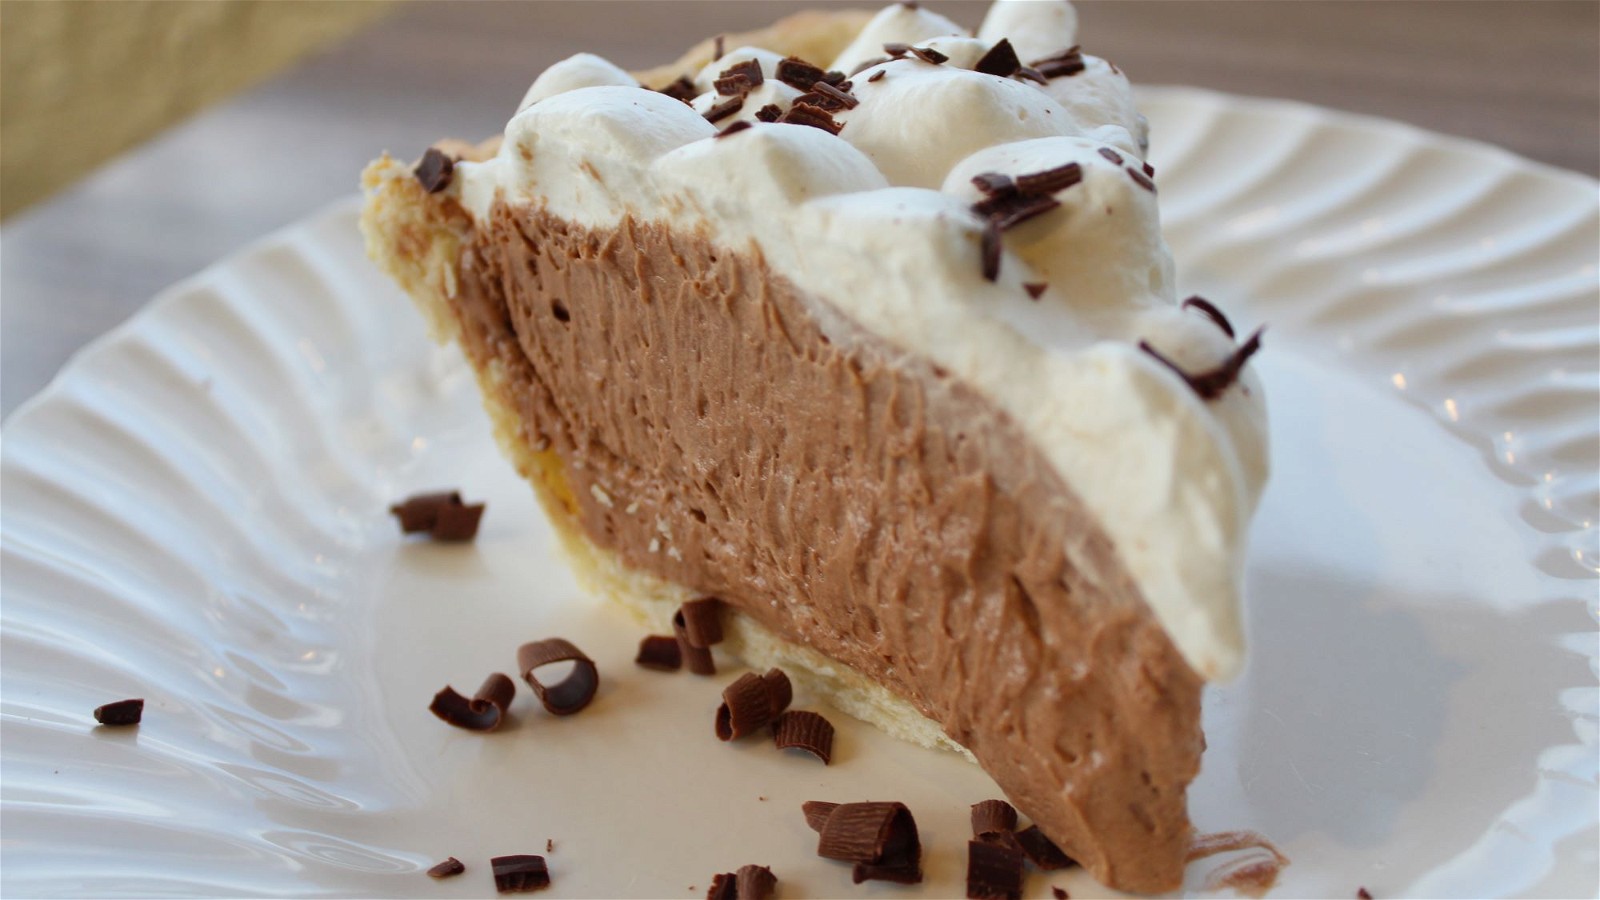 Image of French Silk Pie